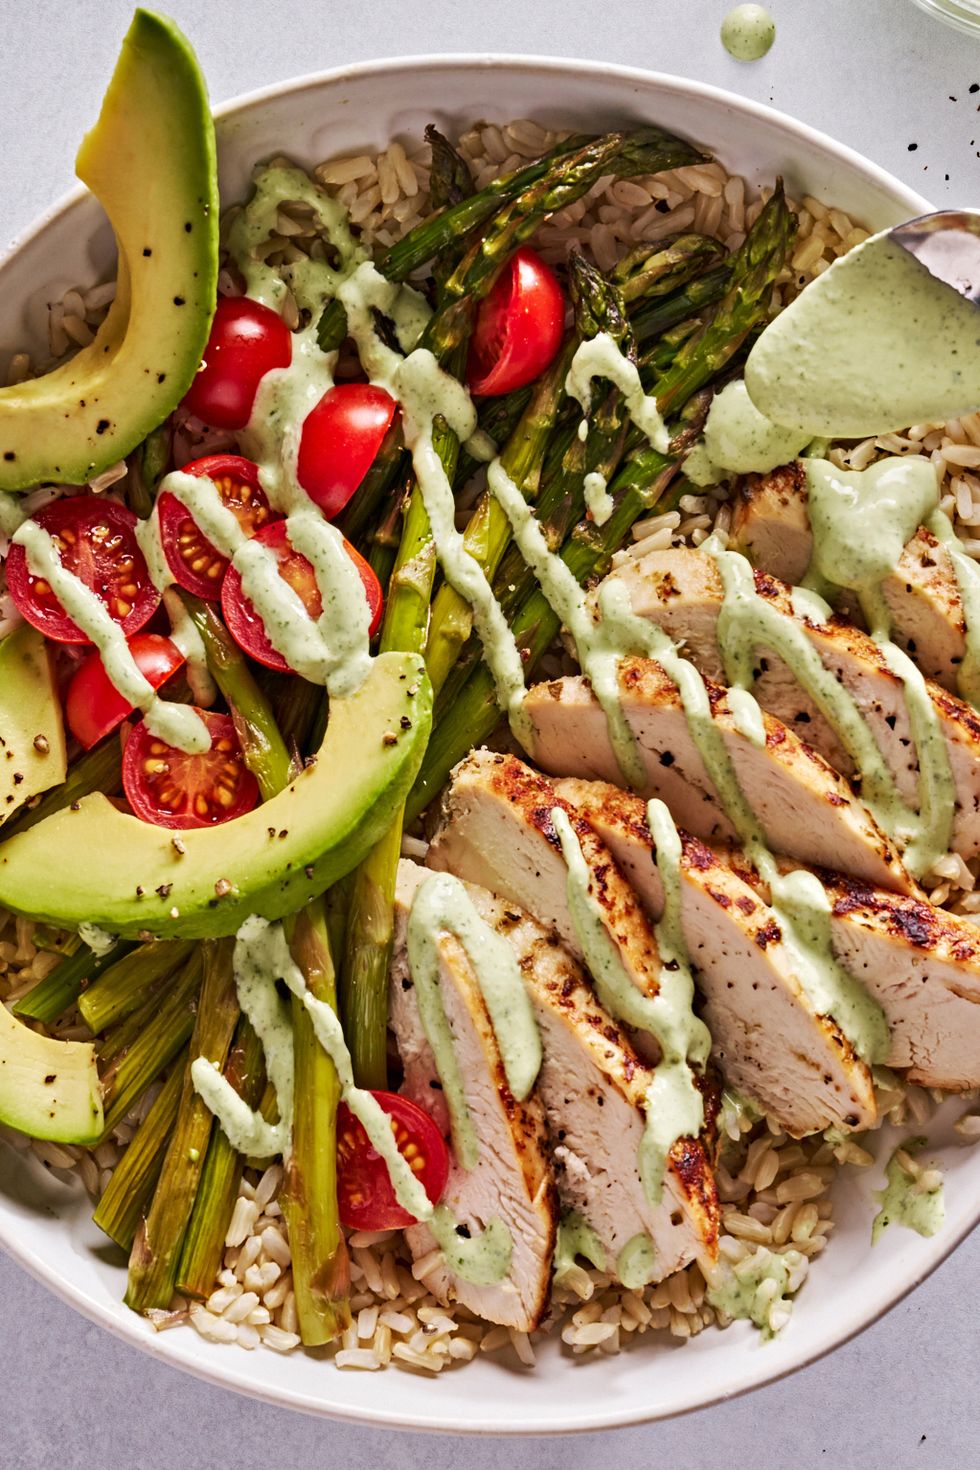 goddess bowls with chicken, asparagus, avocado and tomatoes drizzled with a creamy, green dressing